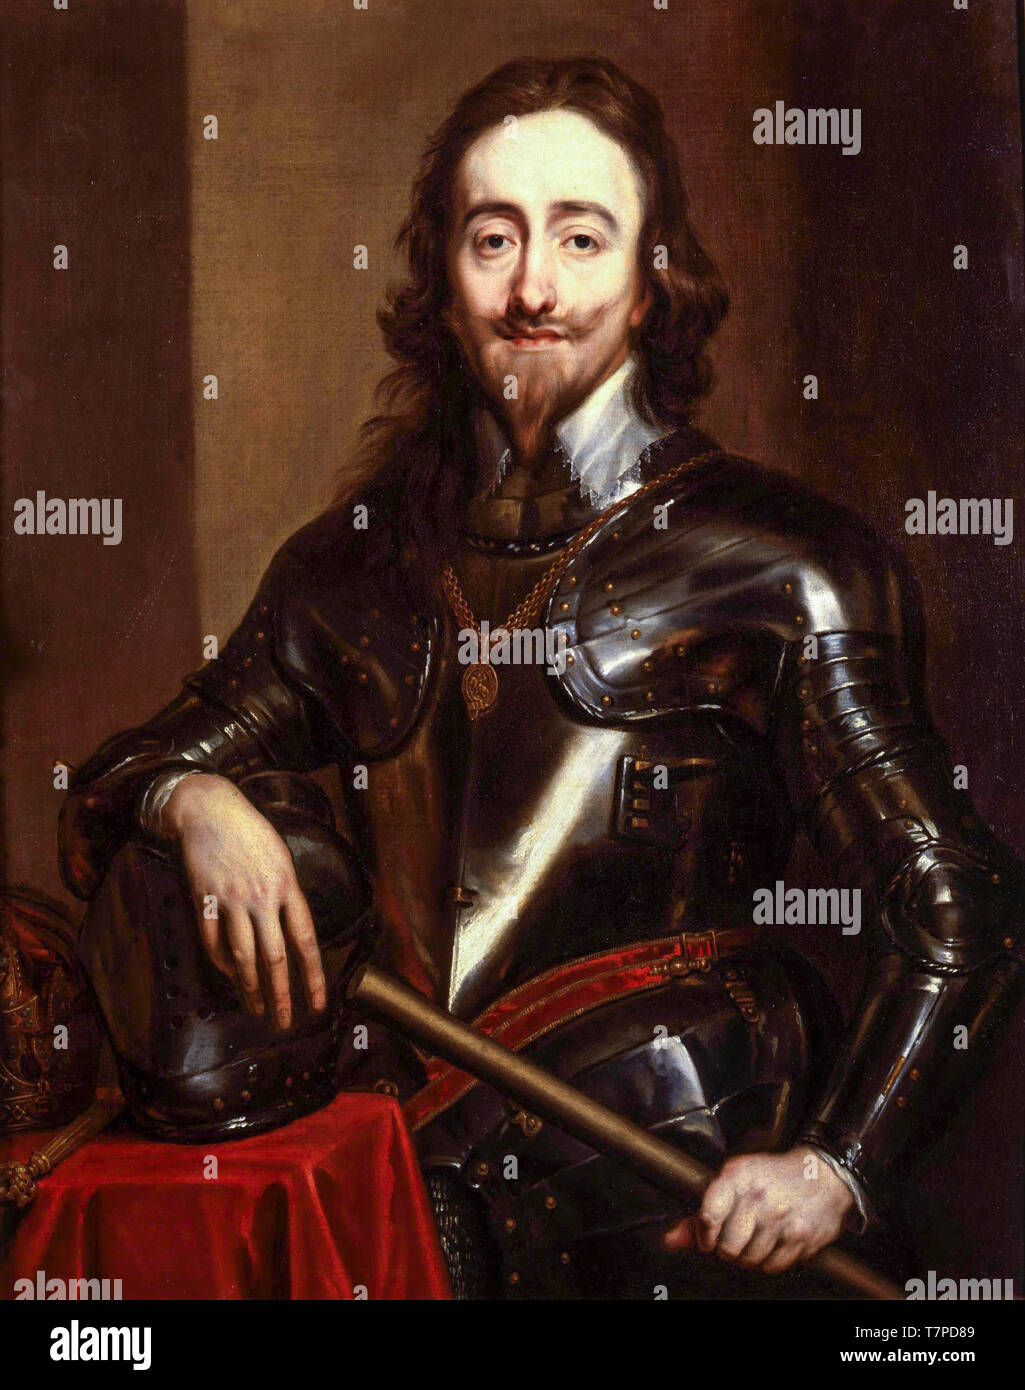 Charles I of England (1600-1649), portrait painting in armour by studio of Anthony van Dyck, 17th Century Stock Photo